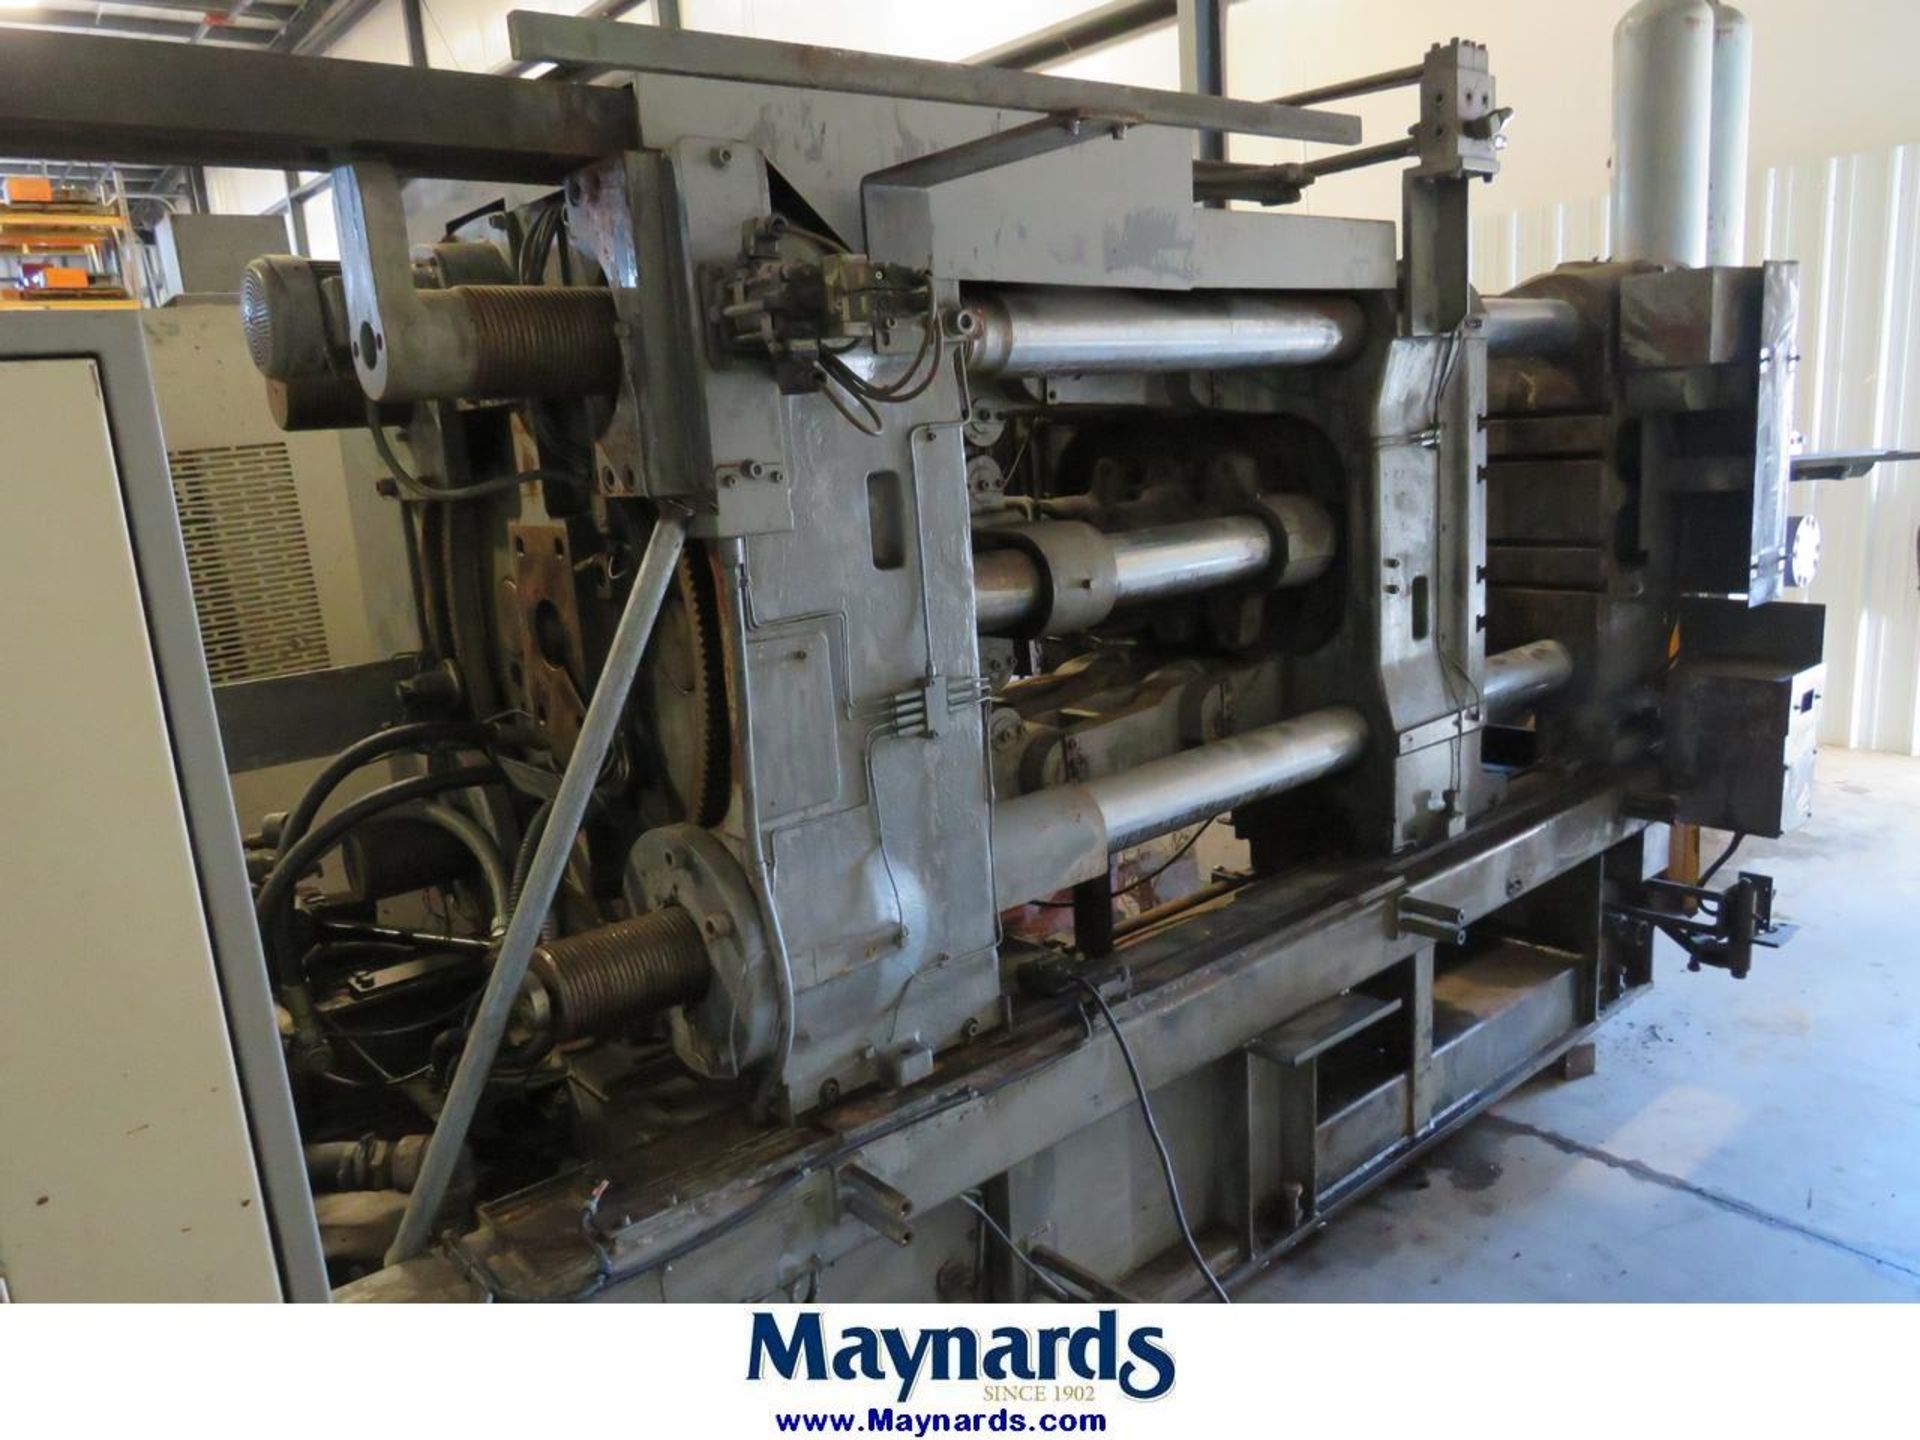 2005 Toyo BD-350V4-T 350 Ton Horizontal Cold Chamber Die Cast Press - Image 2 of 6